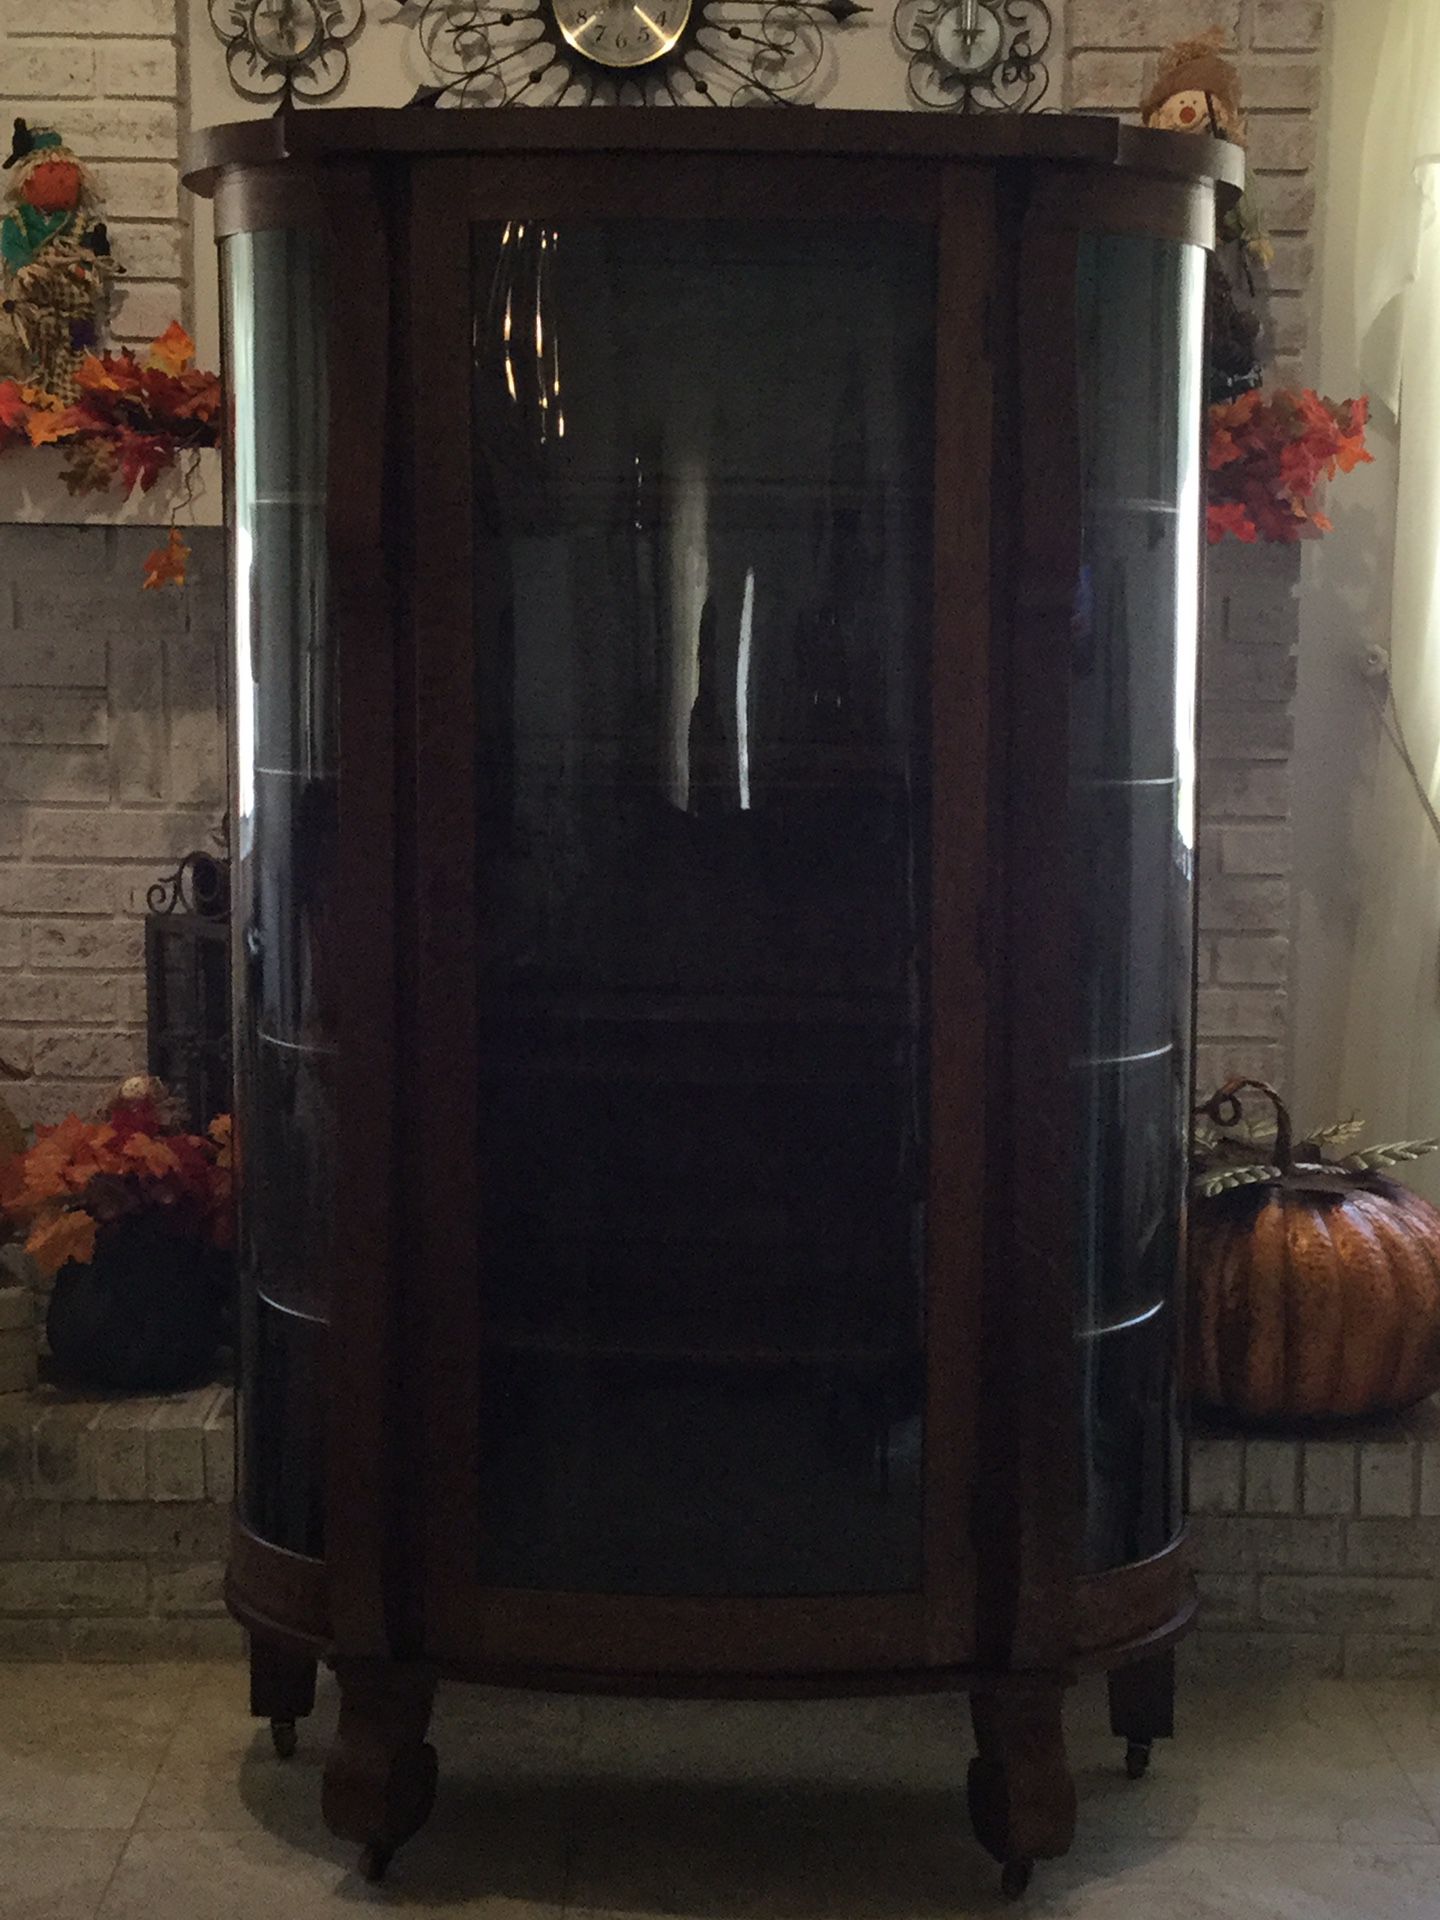 ANTIQUE TRIPLE BOWED GLASS CHINA CABINET